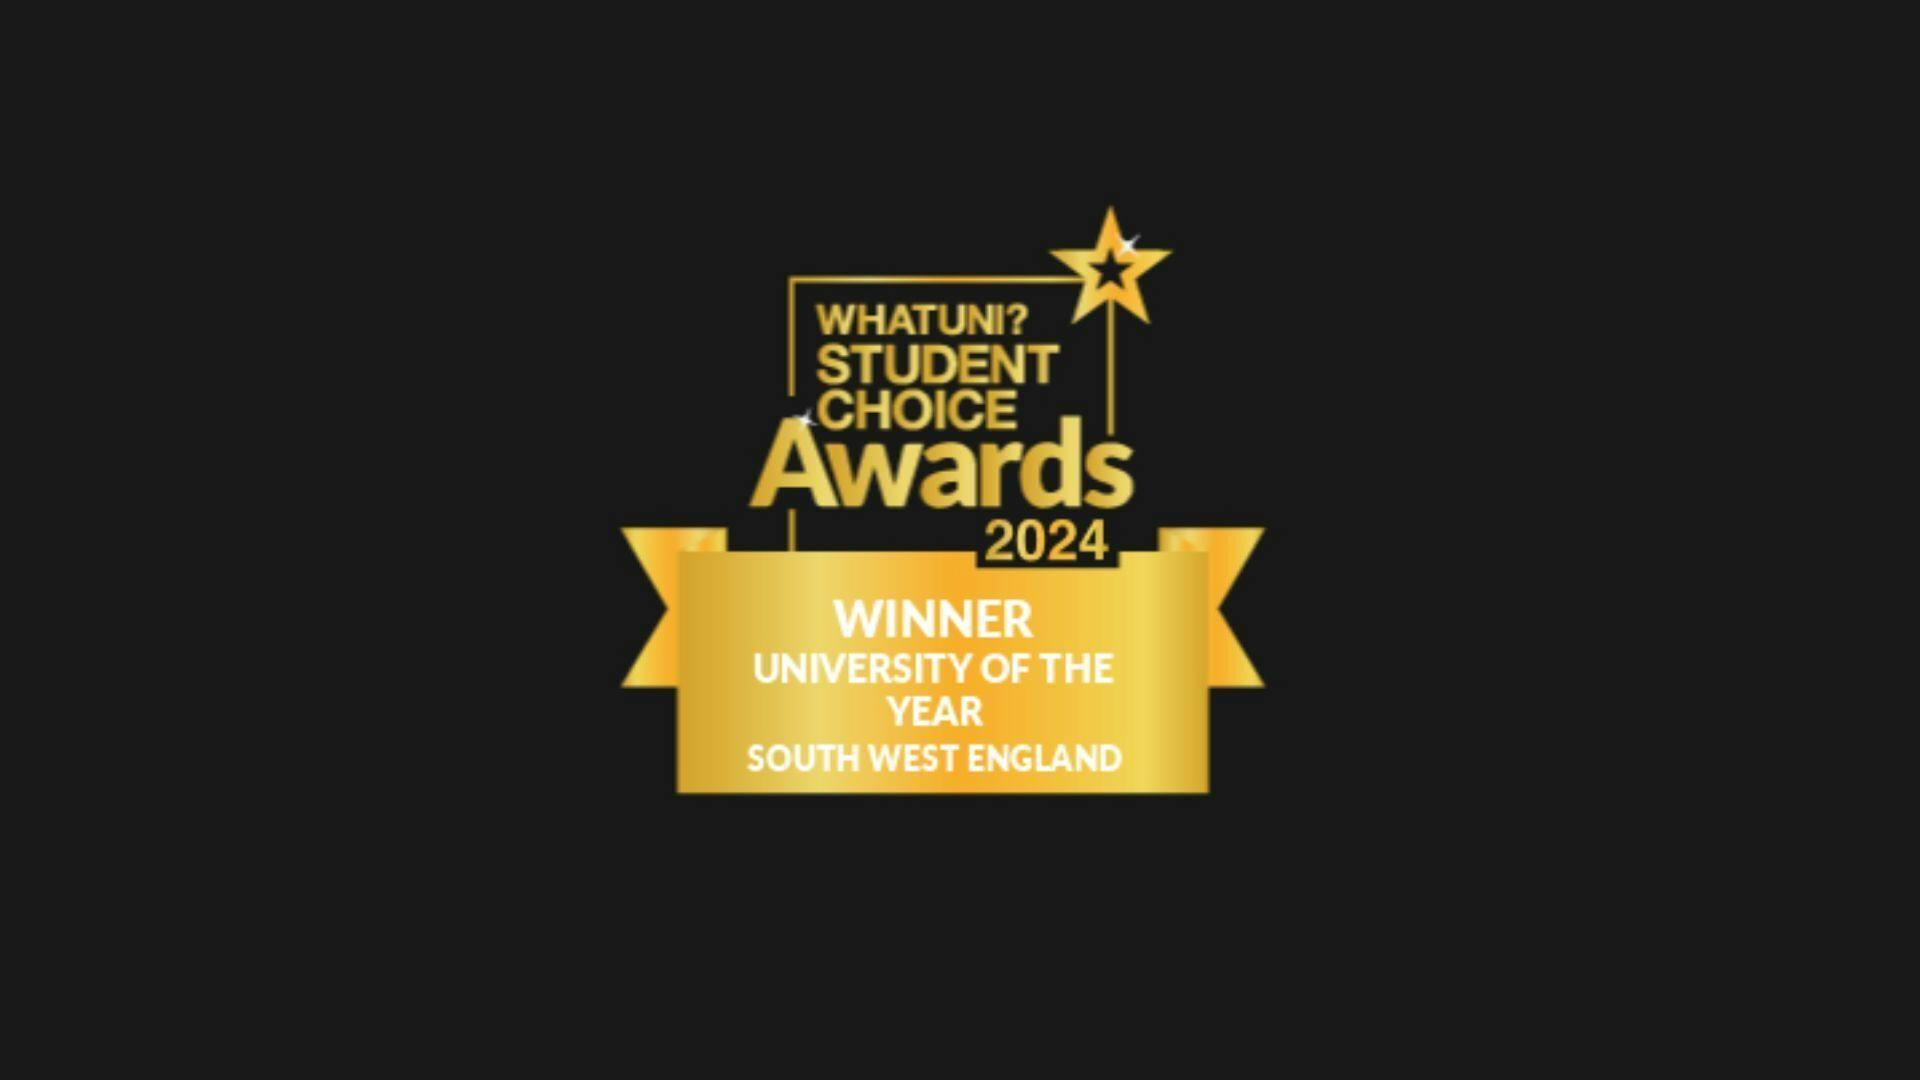 Arts University Plymouth is Winner of the University of the Year South West in the WUSCAS 2024